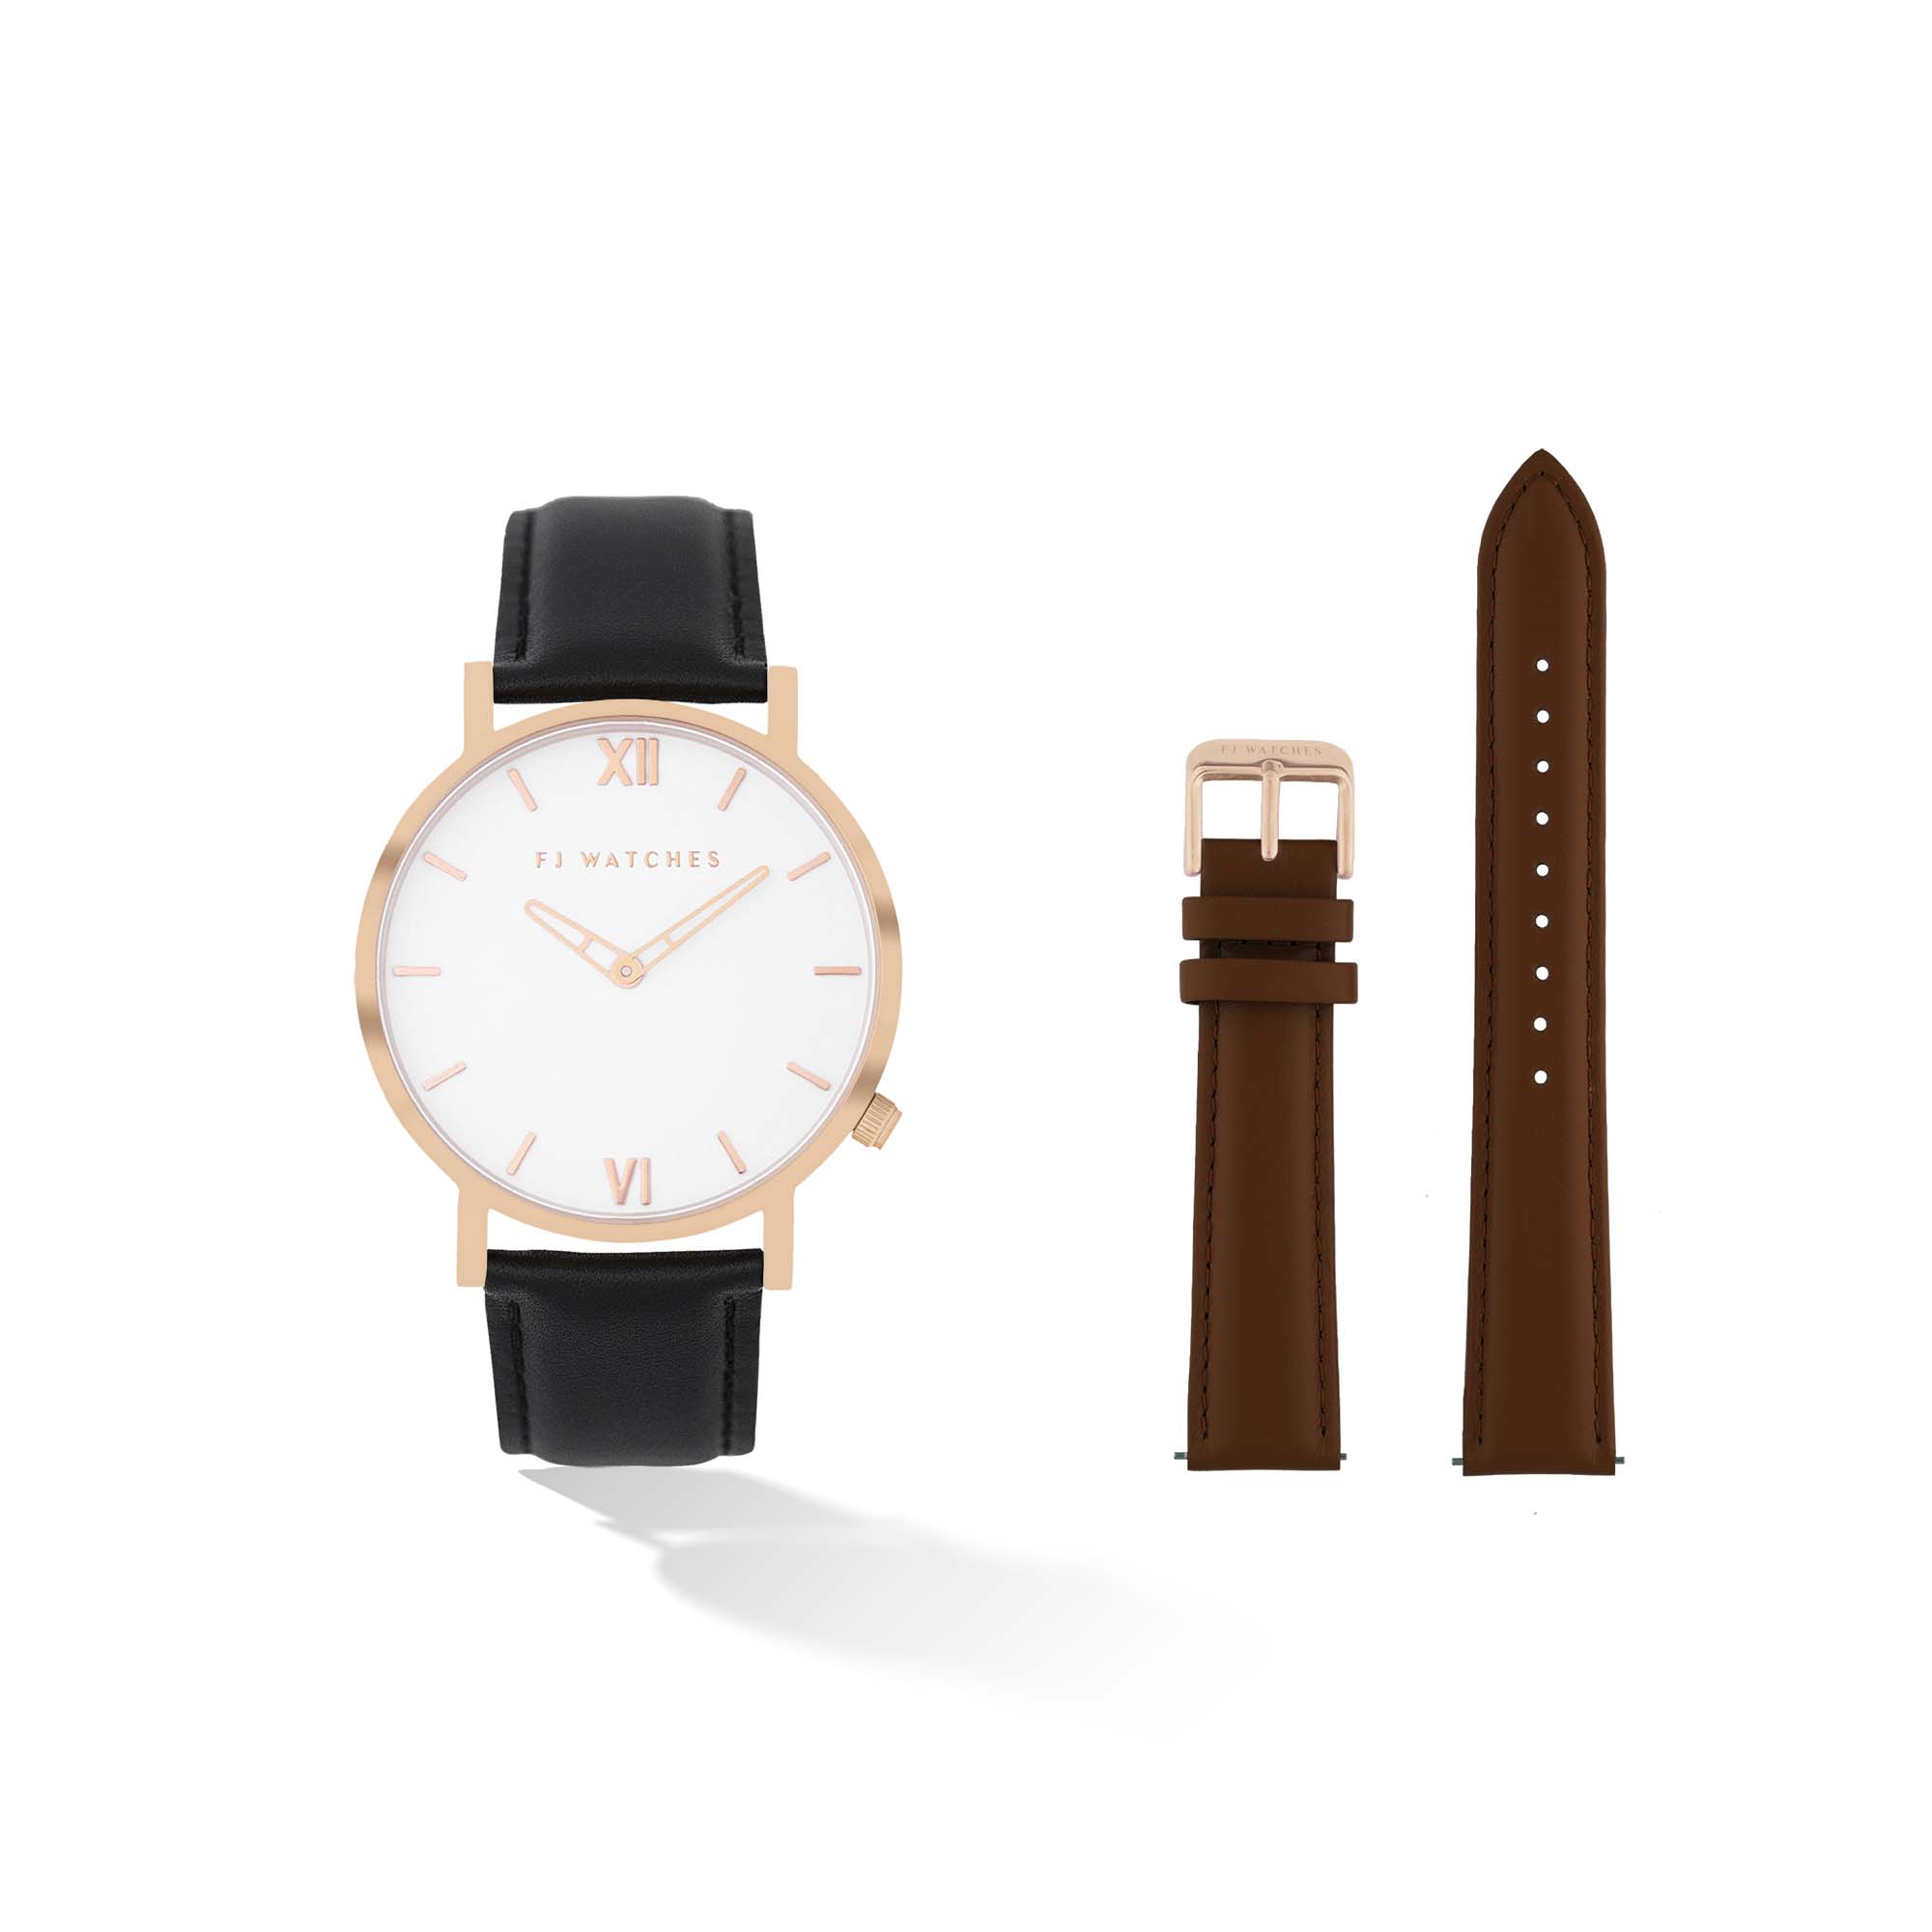 Discover the Golden Sun set, a 36mm men and women watch from Five Jwlry. Equipped with a minimalist white and rose gold dial. In this special edition, this watch comes with two leathers, one black leather and one brown. The perfect gift!